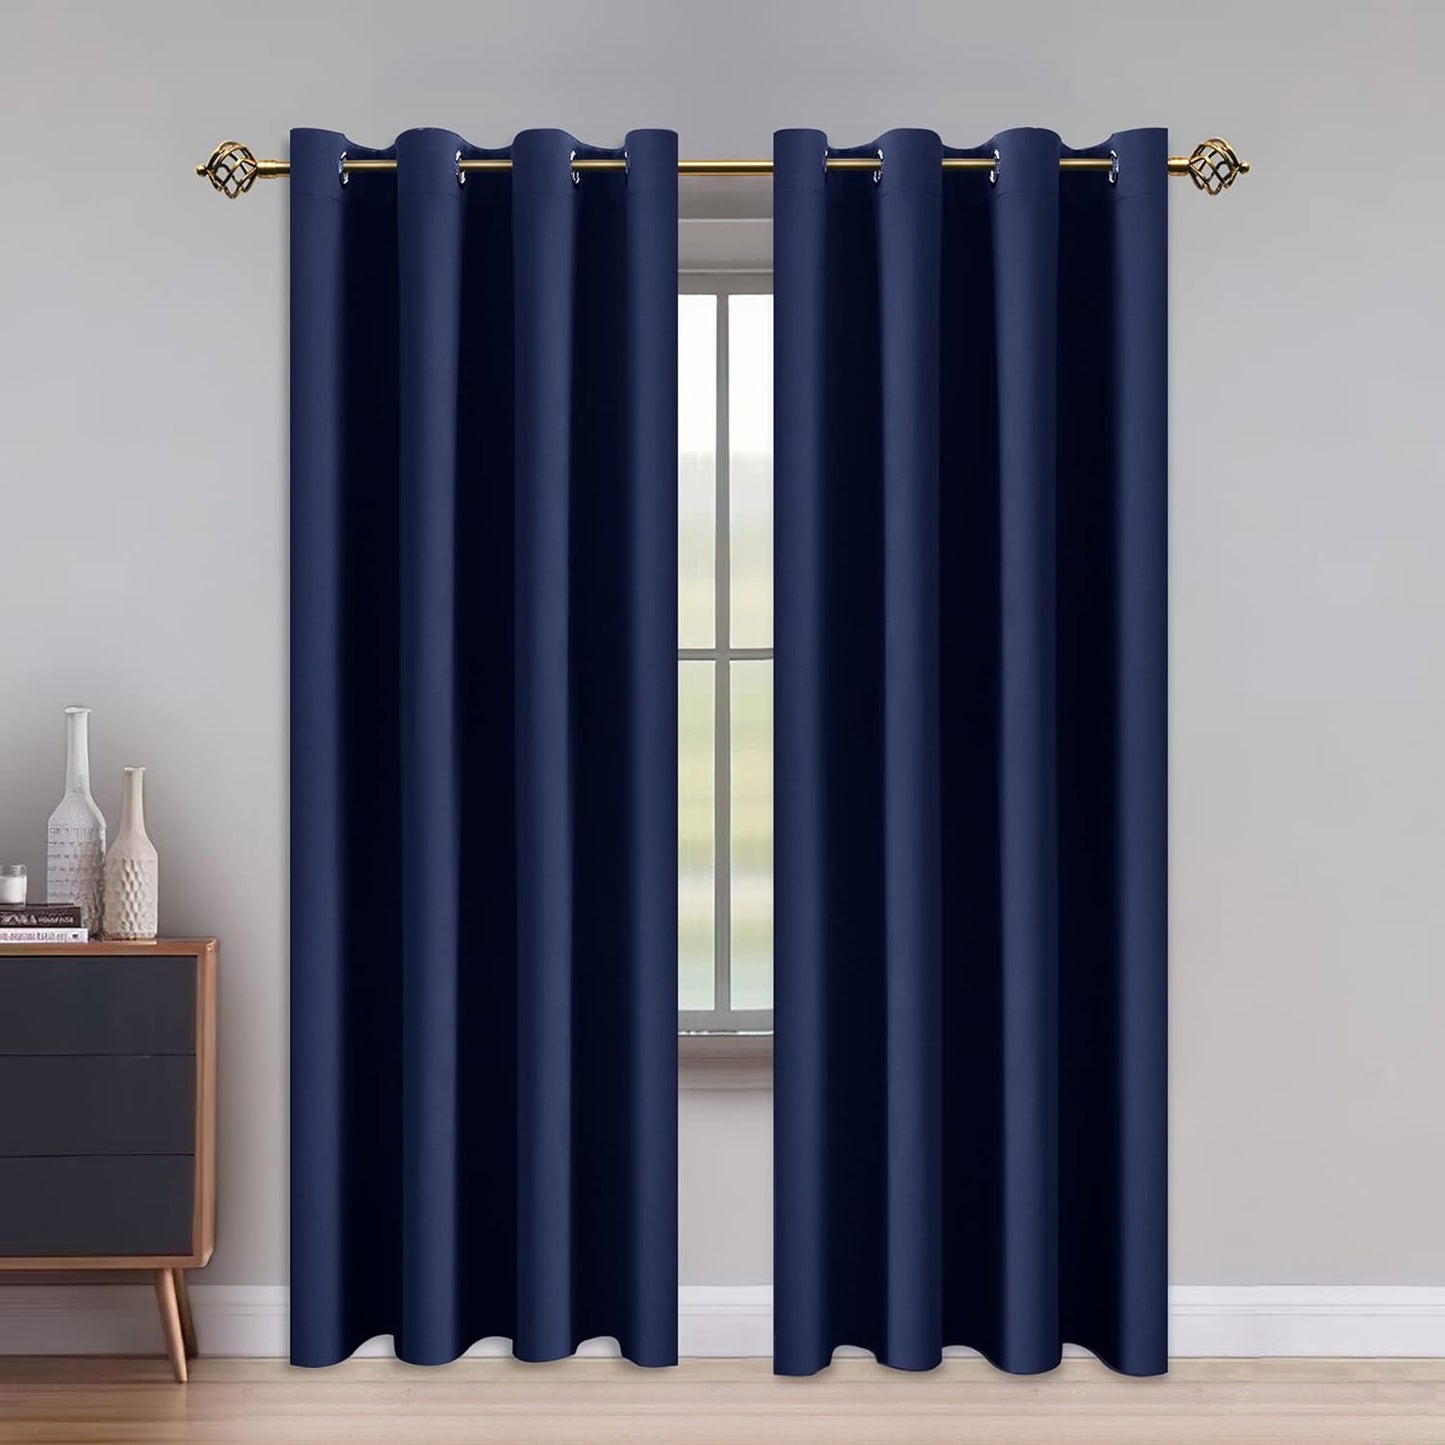 LUSHLEAF Blackout Curtains for Bedroom, Solid Thermal Insulated with Grommet Noise Reduction Window Drapes, Room Darkening Curtains for Living Room, 2 Panels, 52 X 63 Inch Grey  SHEEROOM Navy 52 X 108 Inch 